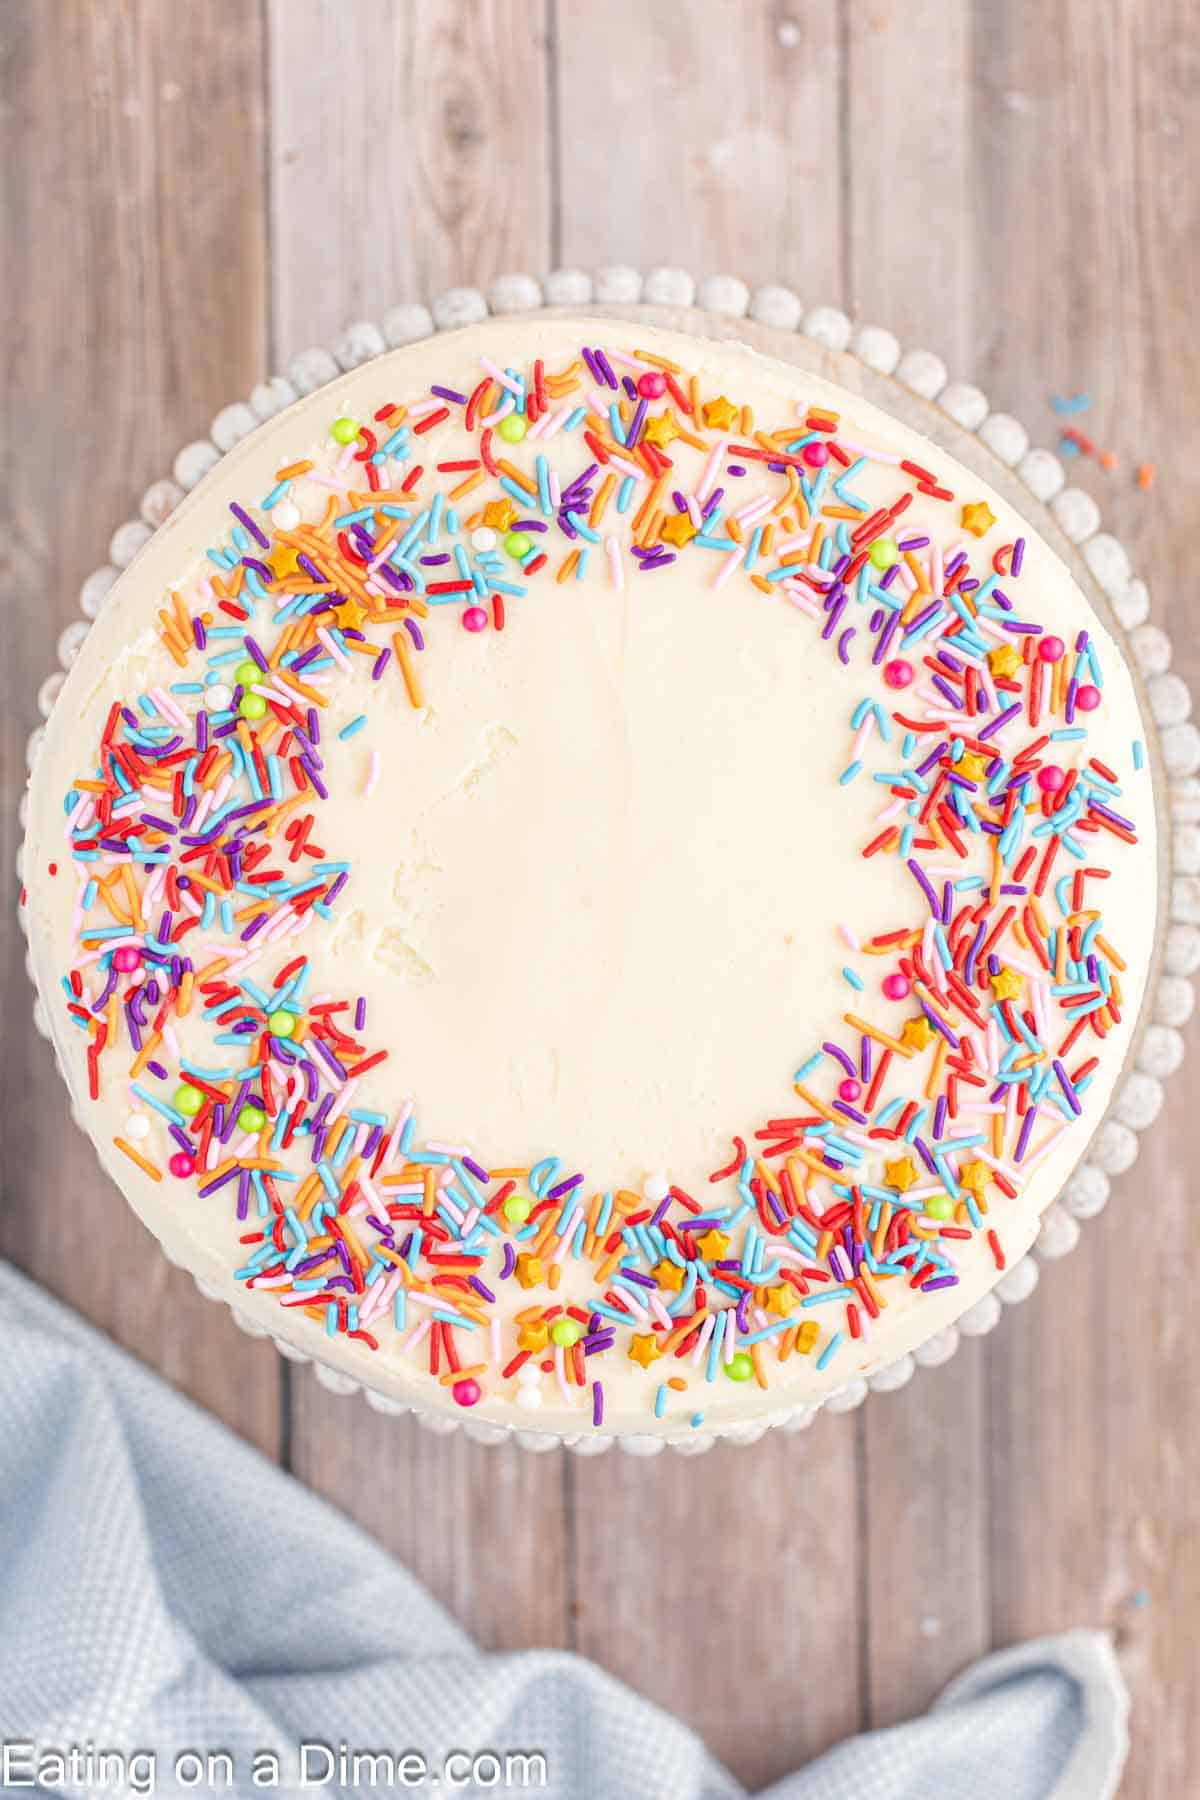 Frost cake and top with sprinkles